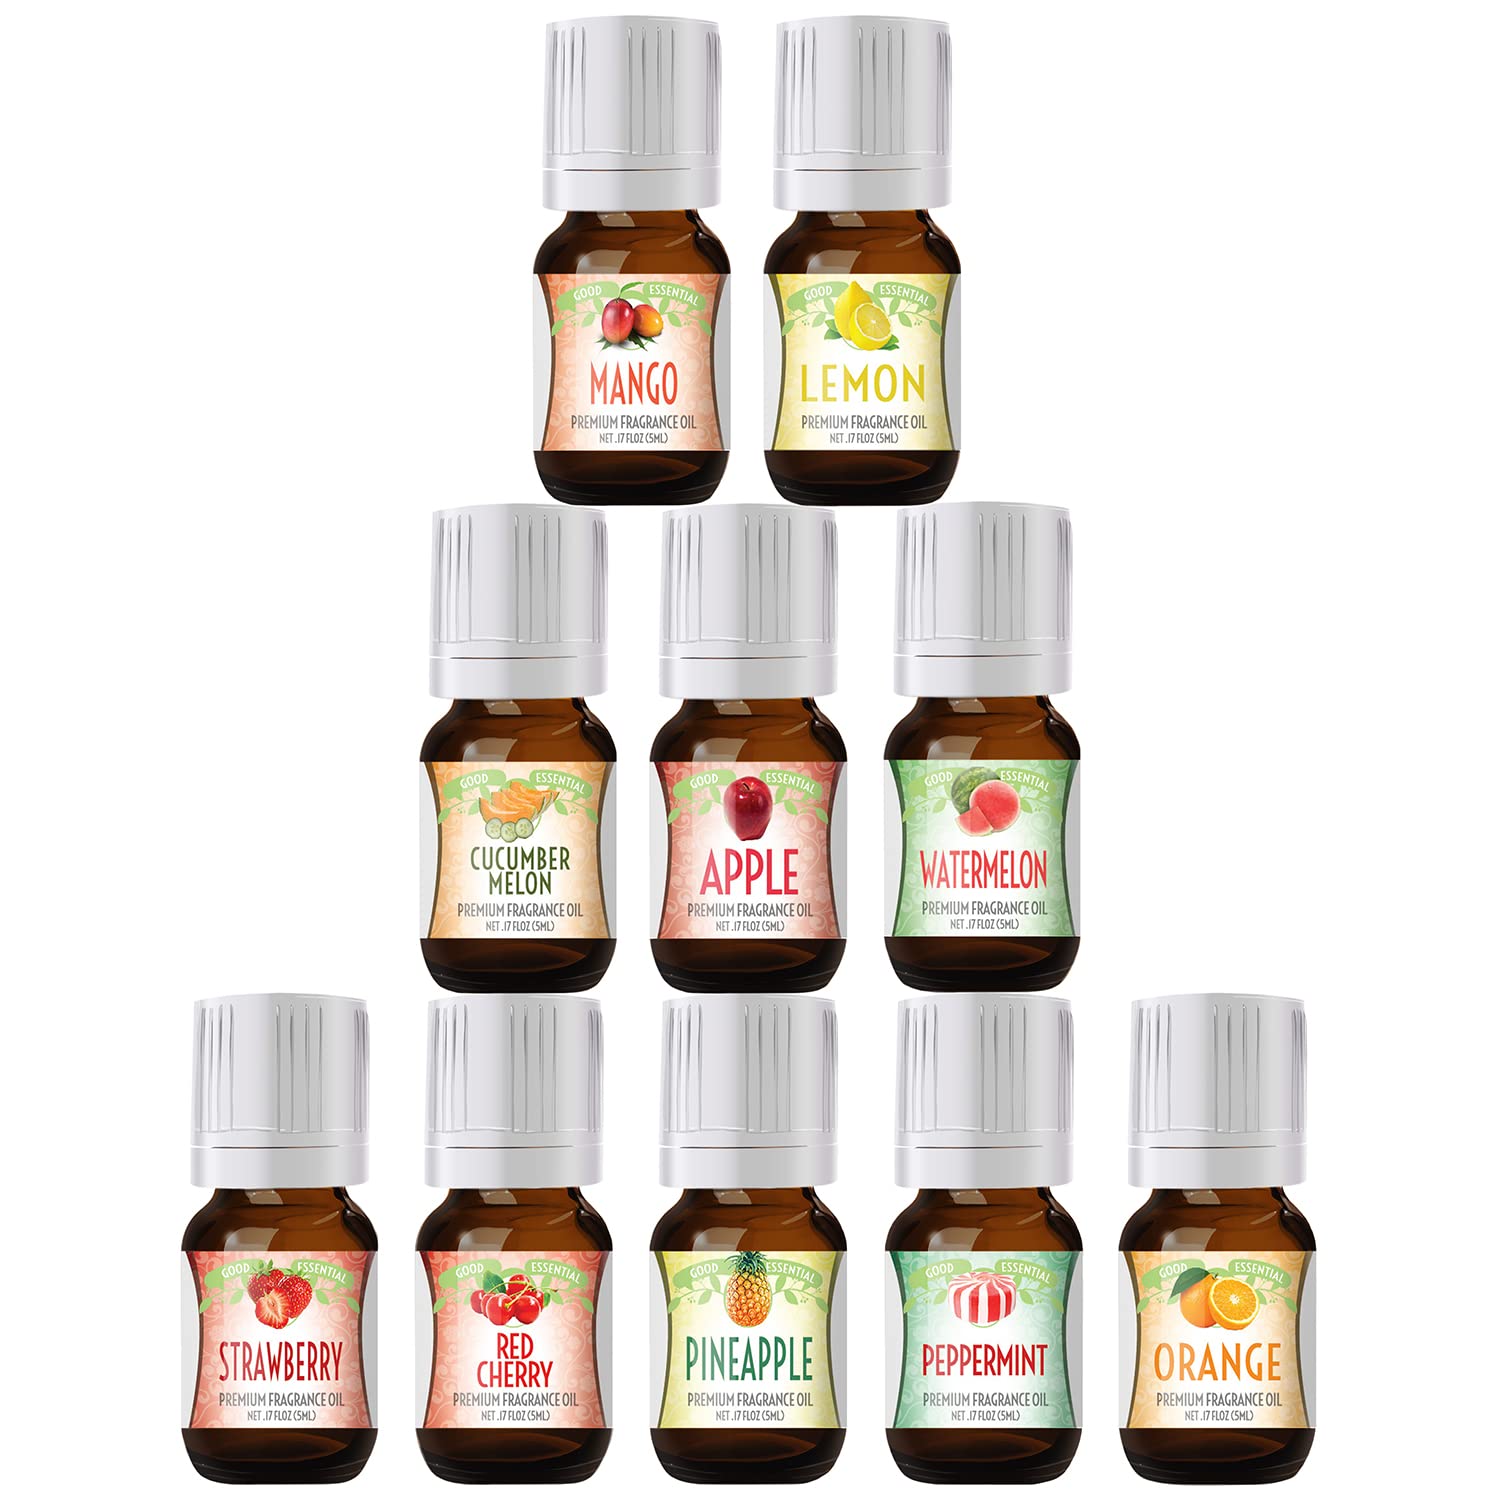 Top Fragrance Oil Set - Best 12 Scented Perfume Oil - Cotton Candy,  Cucumber Melon, Freesia, Cupcake, Gardenia, Honeysuckle, Jas Best 12 Scented  Perfume Oil - Cotton Candy, Cucumber Melon, Freesia, Frosted